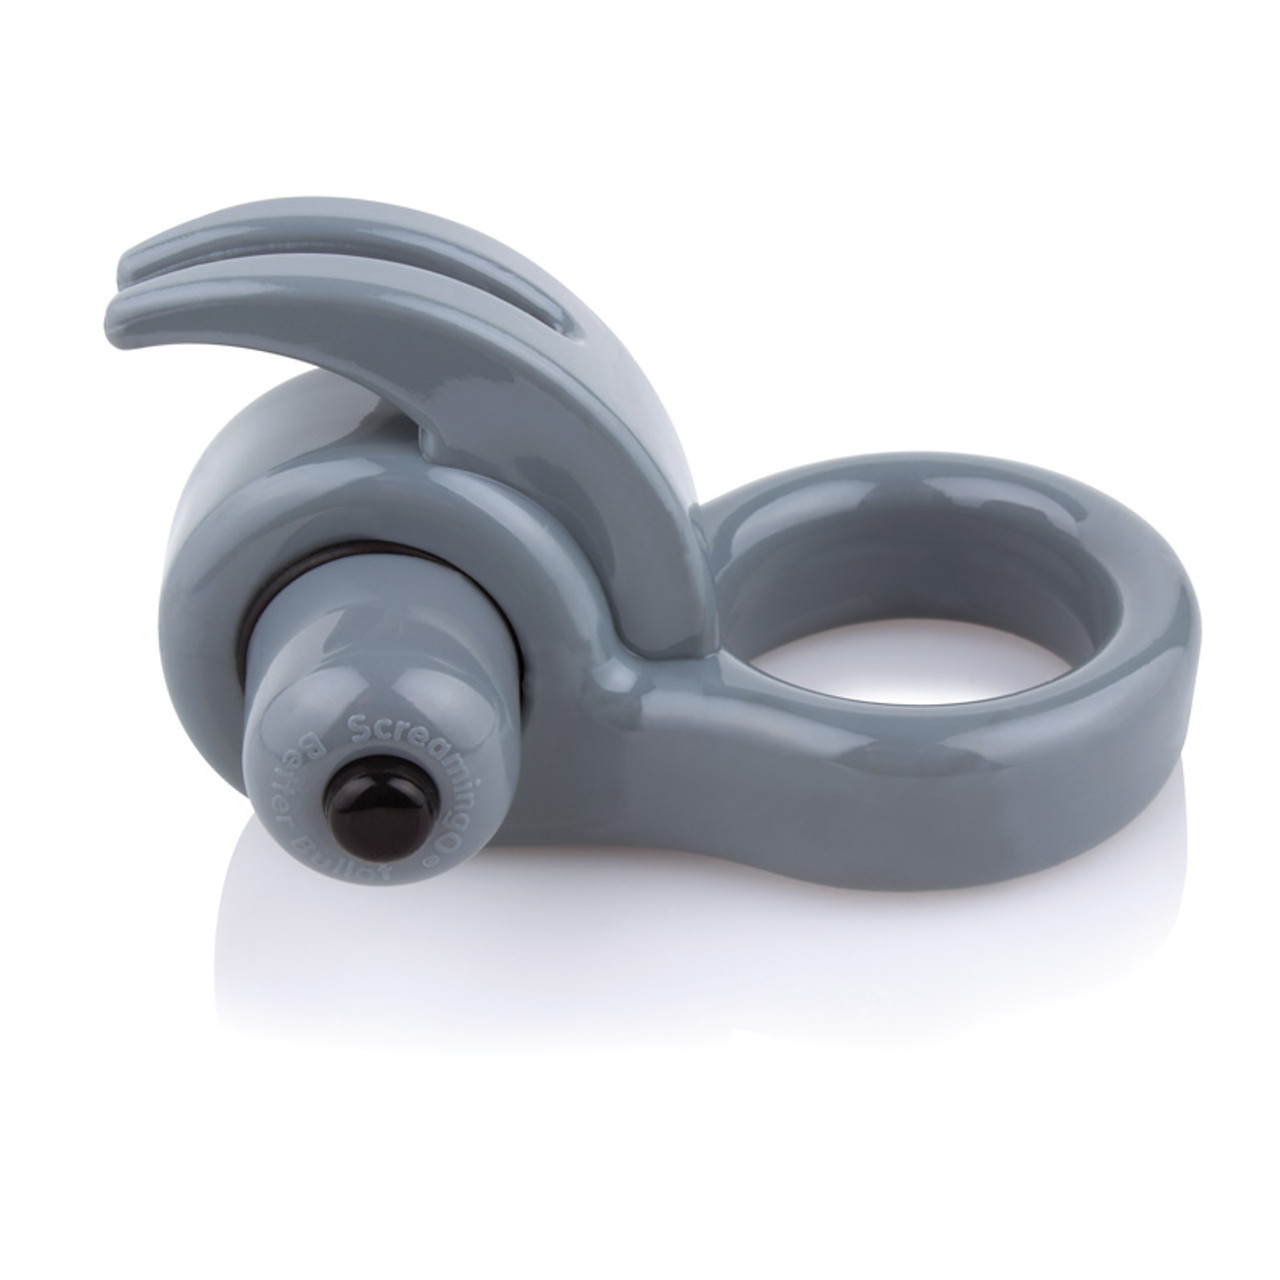 Screaming O SlingO Silicone Penis Ring with Contoured Sling Blue - Dallas  Novelty - Online Sex Toys Retailer